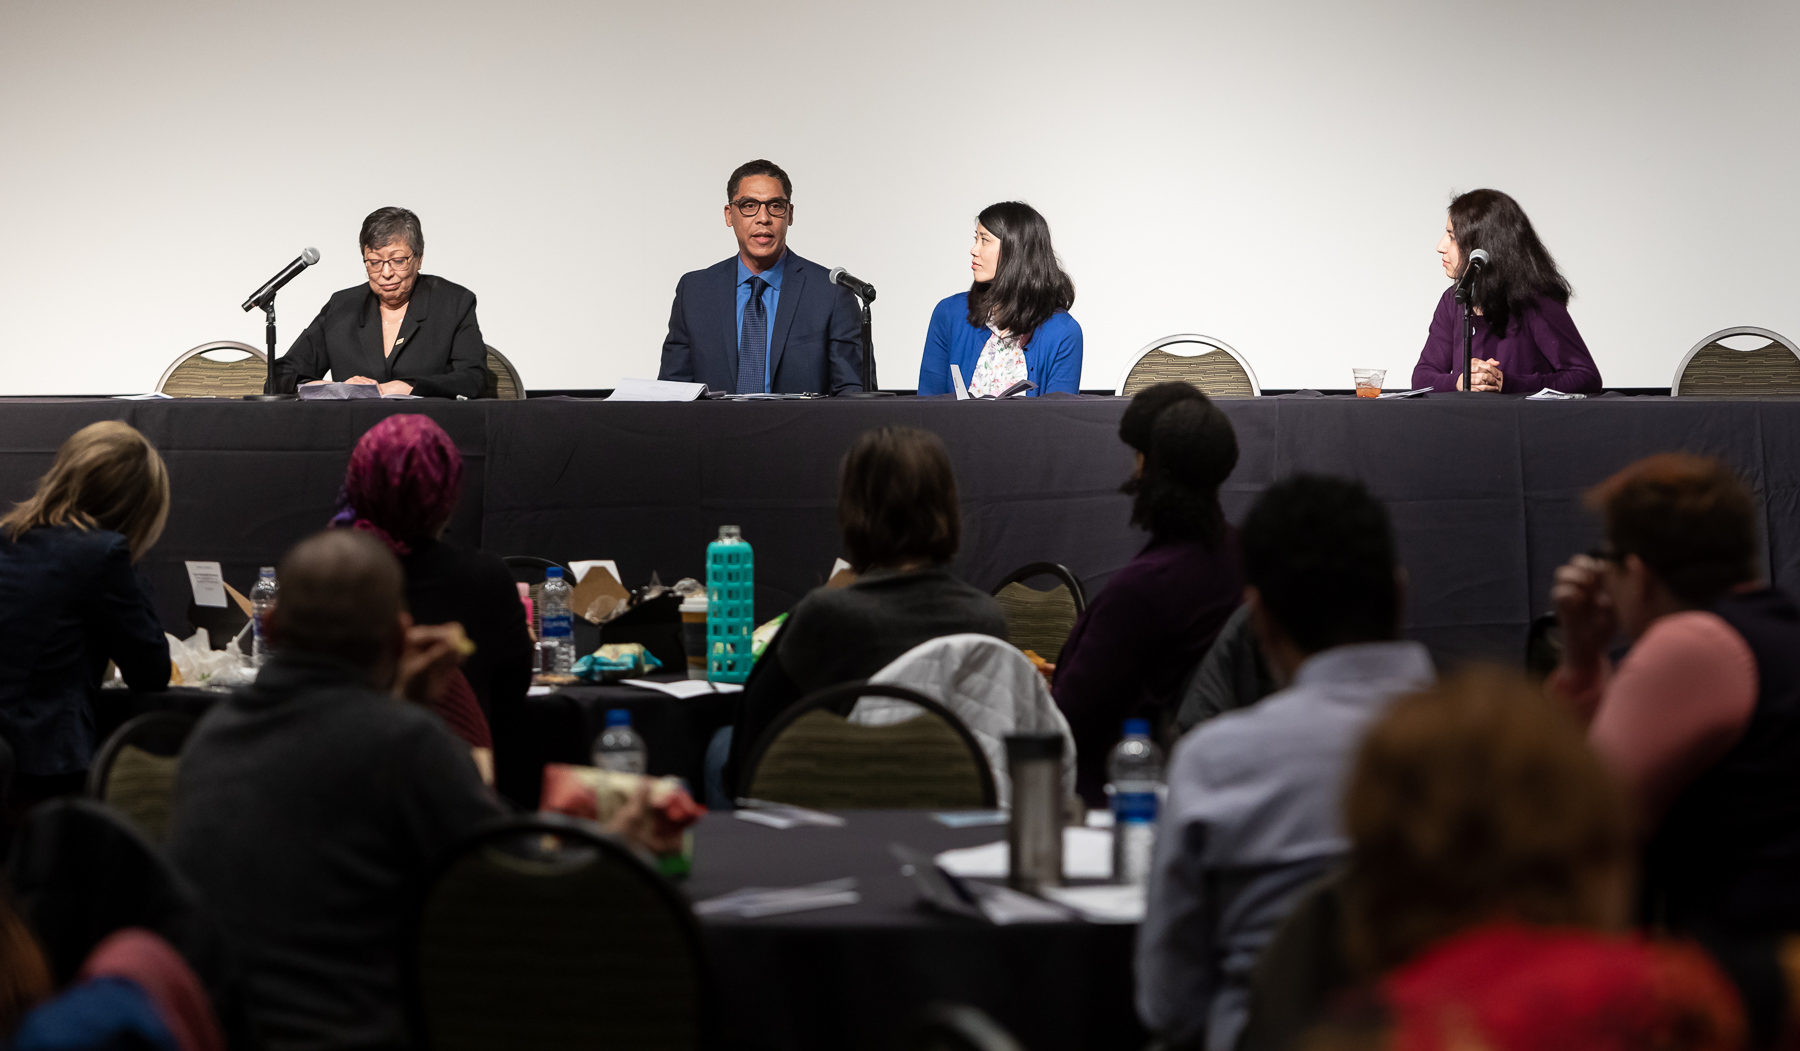 Following the screening and discussion, representatives from several of DePaul's employee resource groups including MERG, ELEVATE, LEAD and the DePaul Women's Network responded to questions about how they work to serve DePaul's diverse community. (DePaul University/Jeff Carrion)